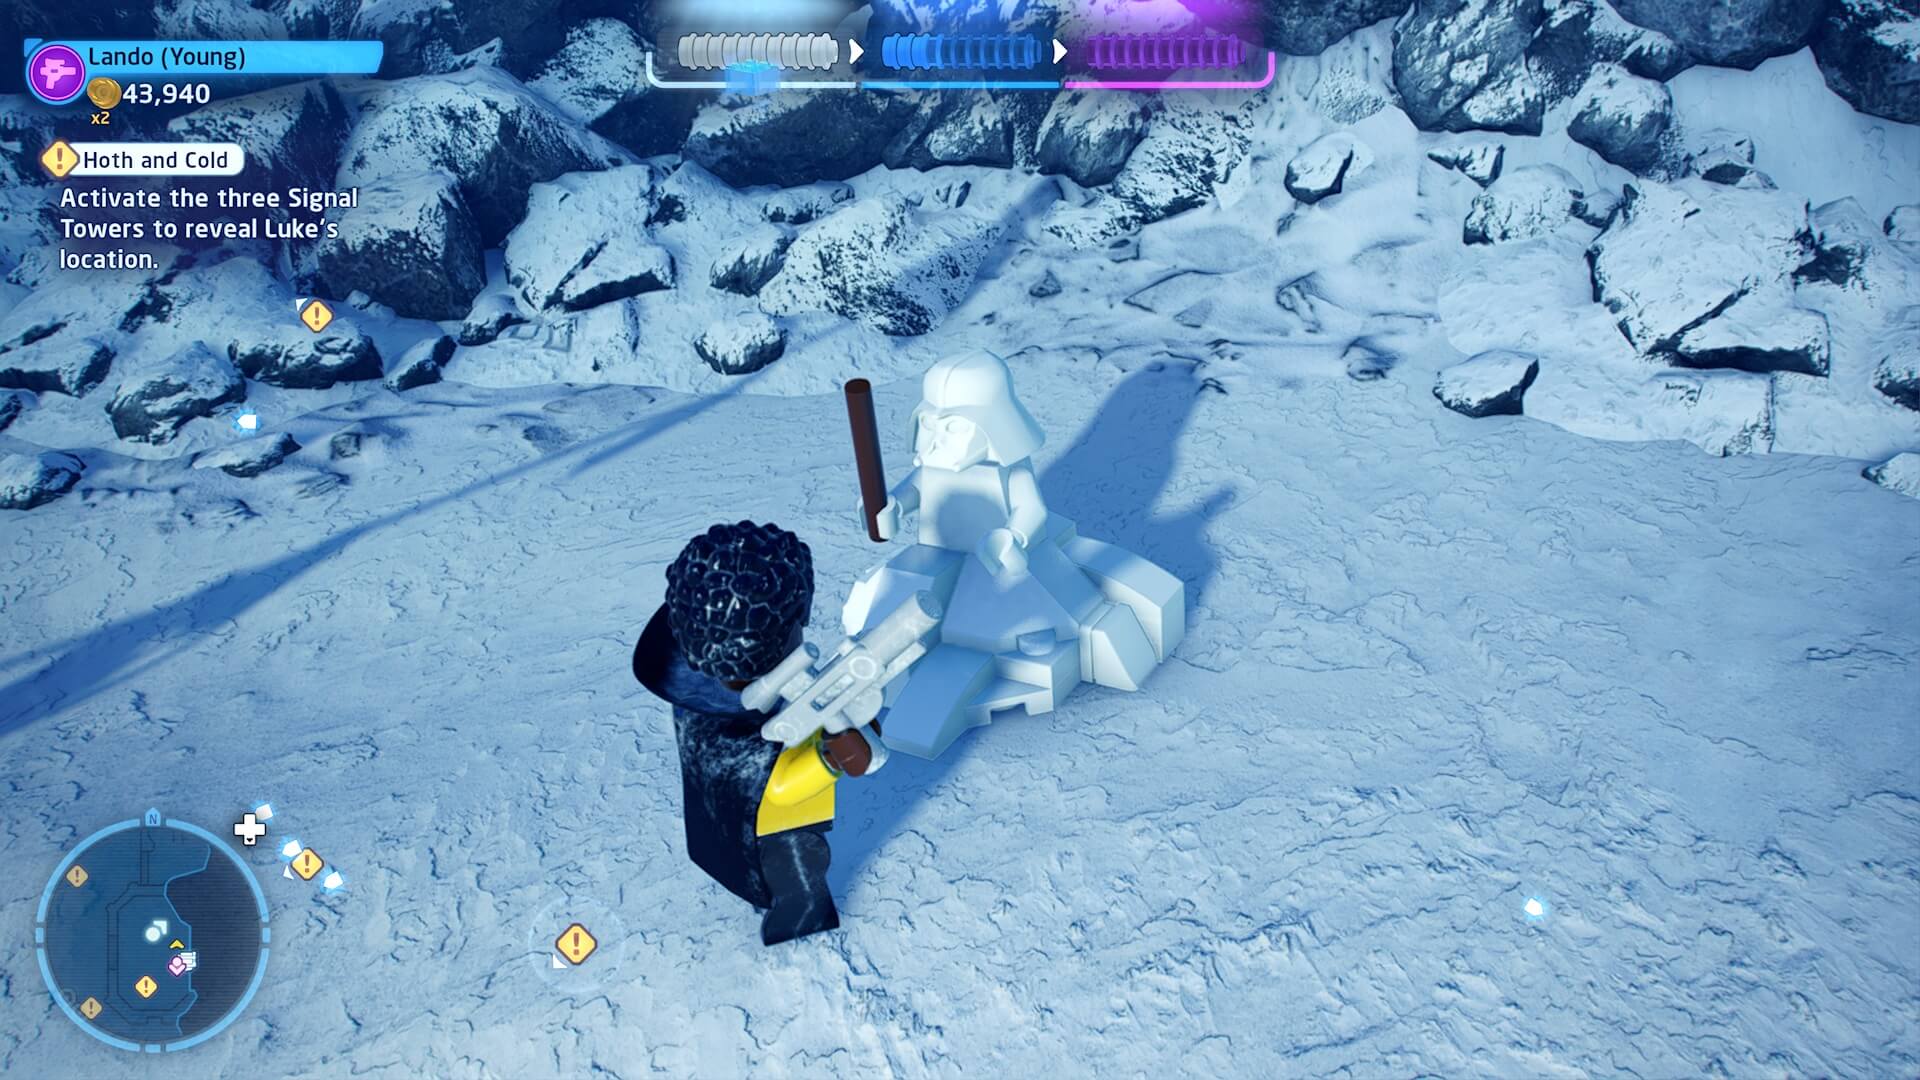 Hoth and Cold snowman 3